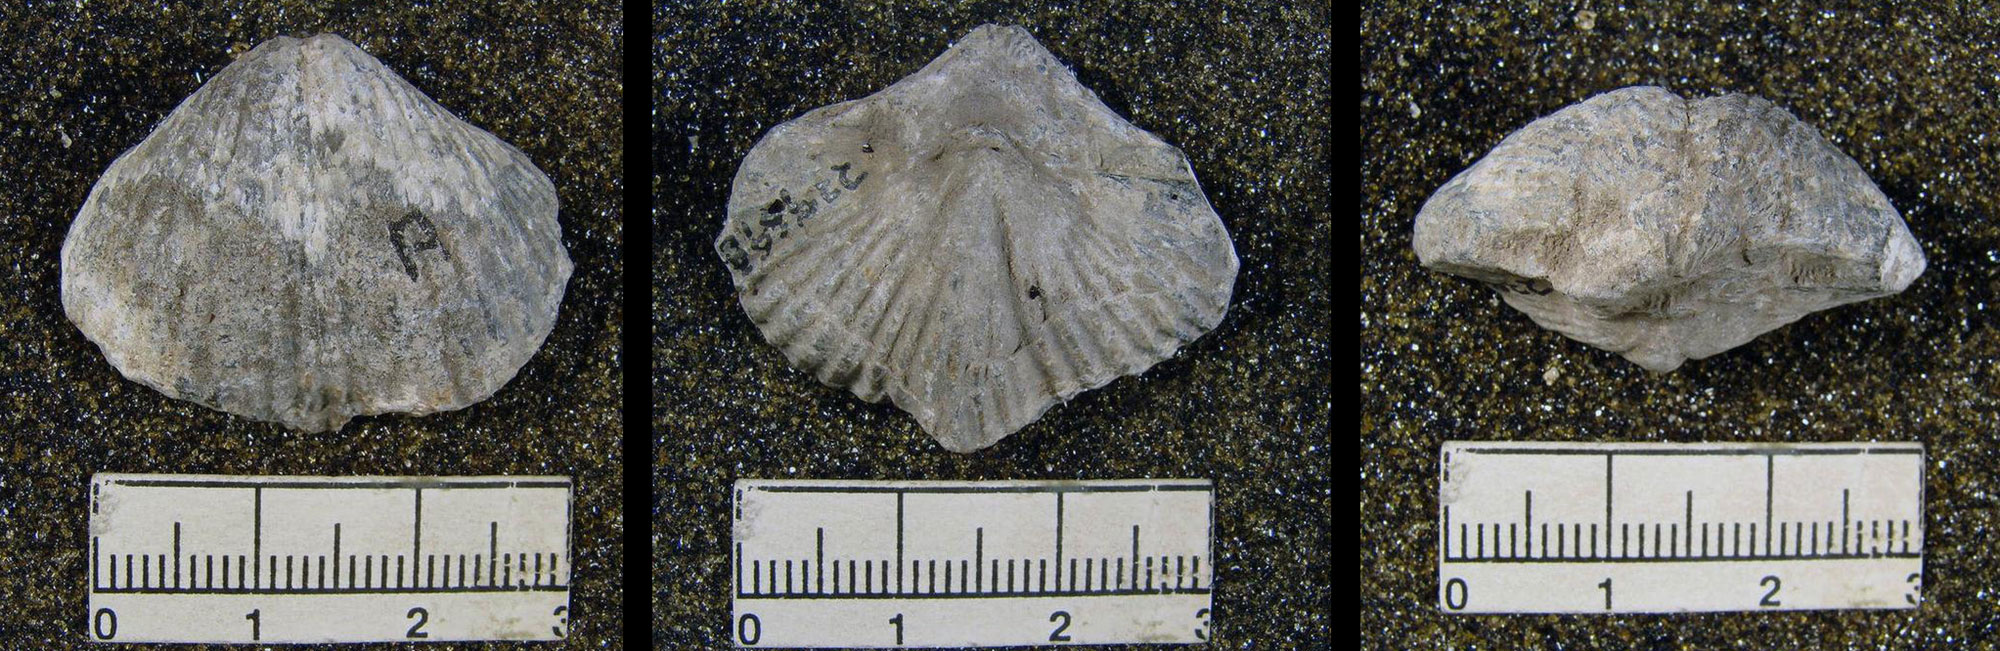 3-panel image of a brachiopod from the Pennsylvanian of Colorado. Panel 1: Top view showing roughly triangular shell with radiating ridges. Panel 2: Underside of the brachiopod, showing a similar-looking shell but with a fold on the plane of symmetry. Panel 3: Hinge of the shell. Shell is a little more than 3 centimeters wide.